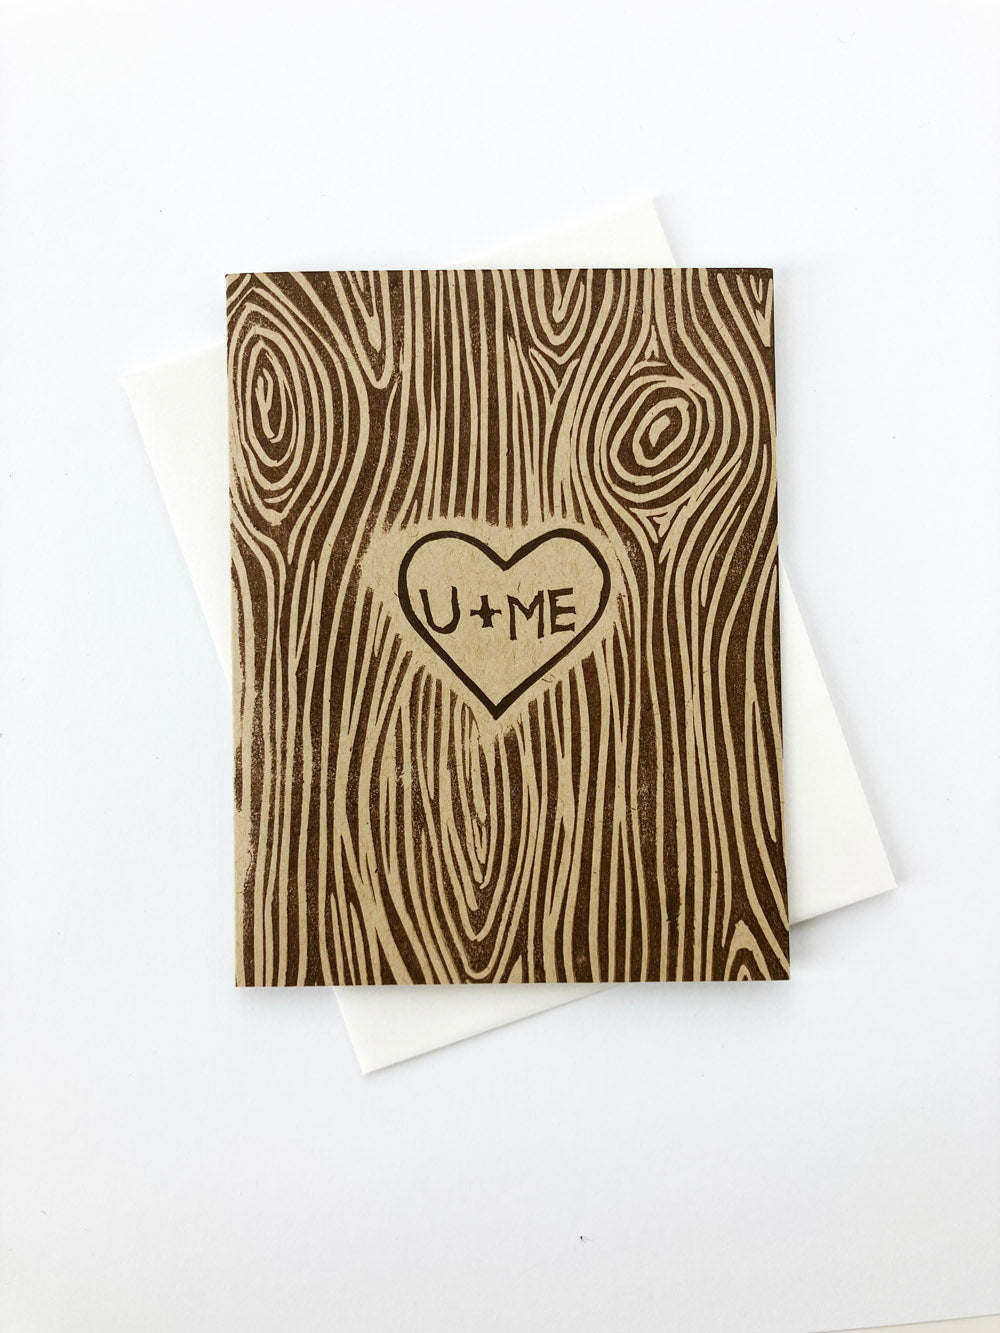 MOVING SALE U + Me Tree Carving Card ONLY 1